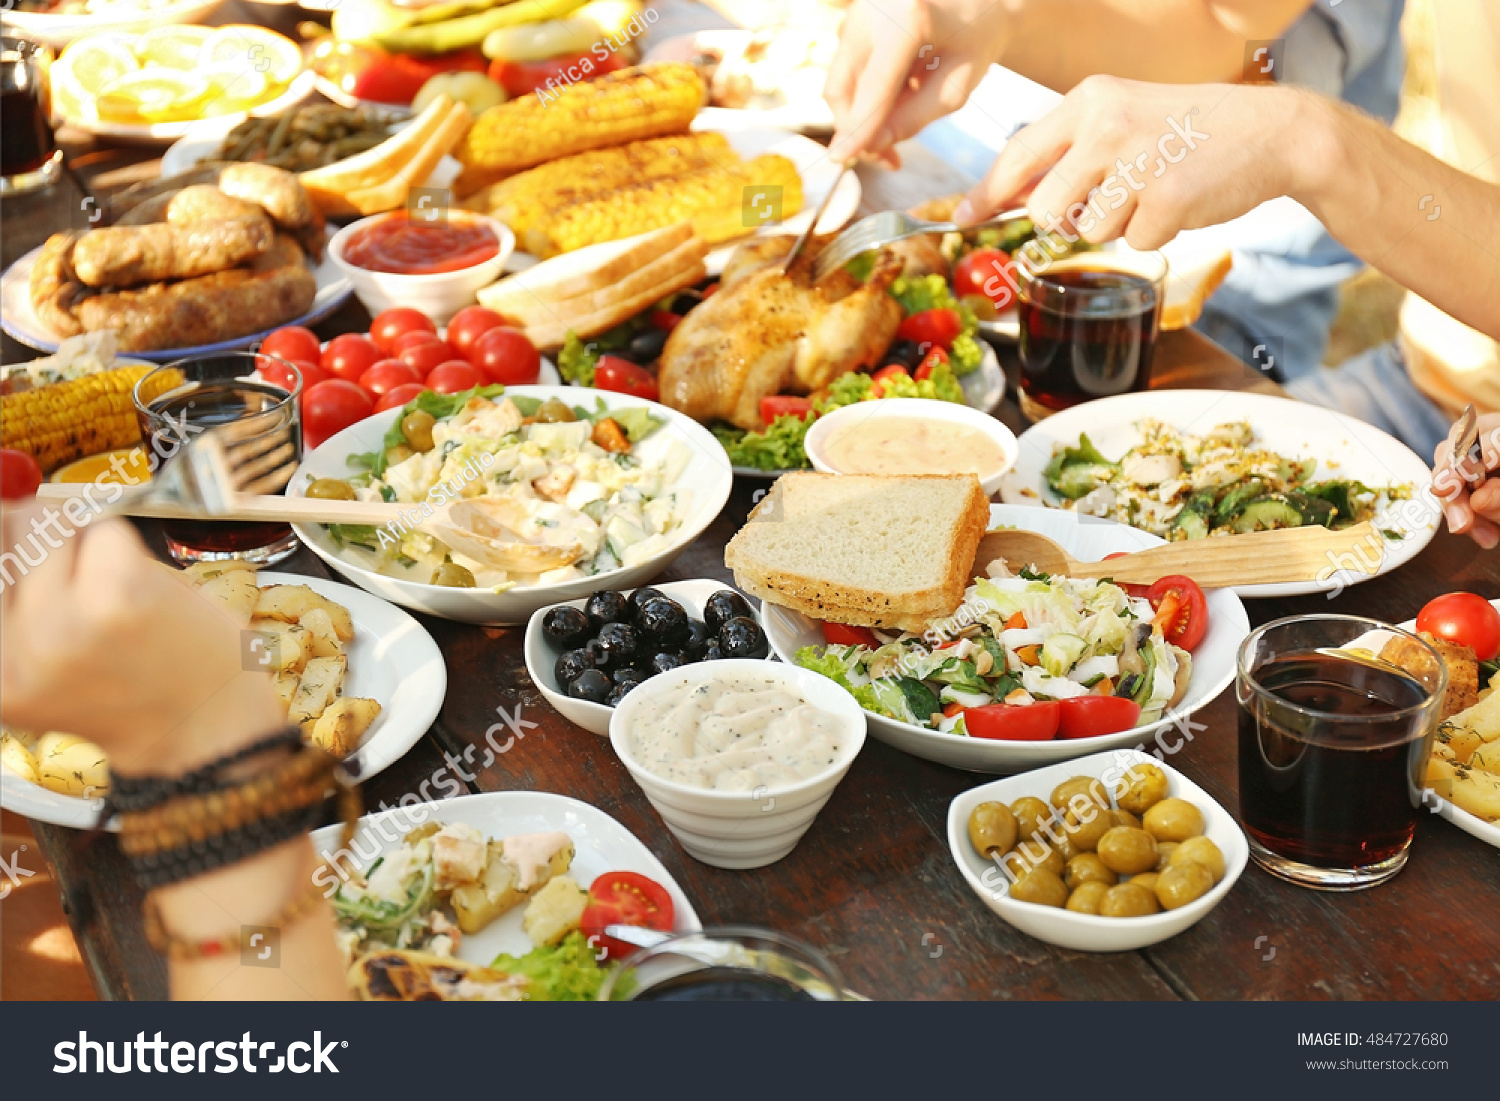 Friends Eating On Picnic Stock Photo 484727680 : Shutterstock